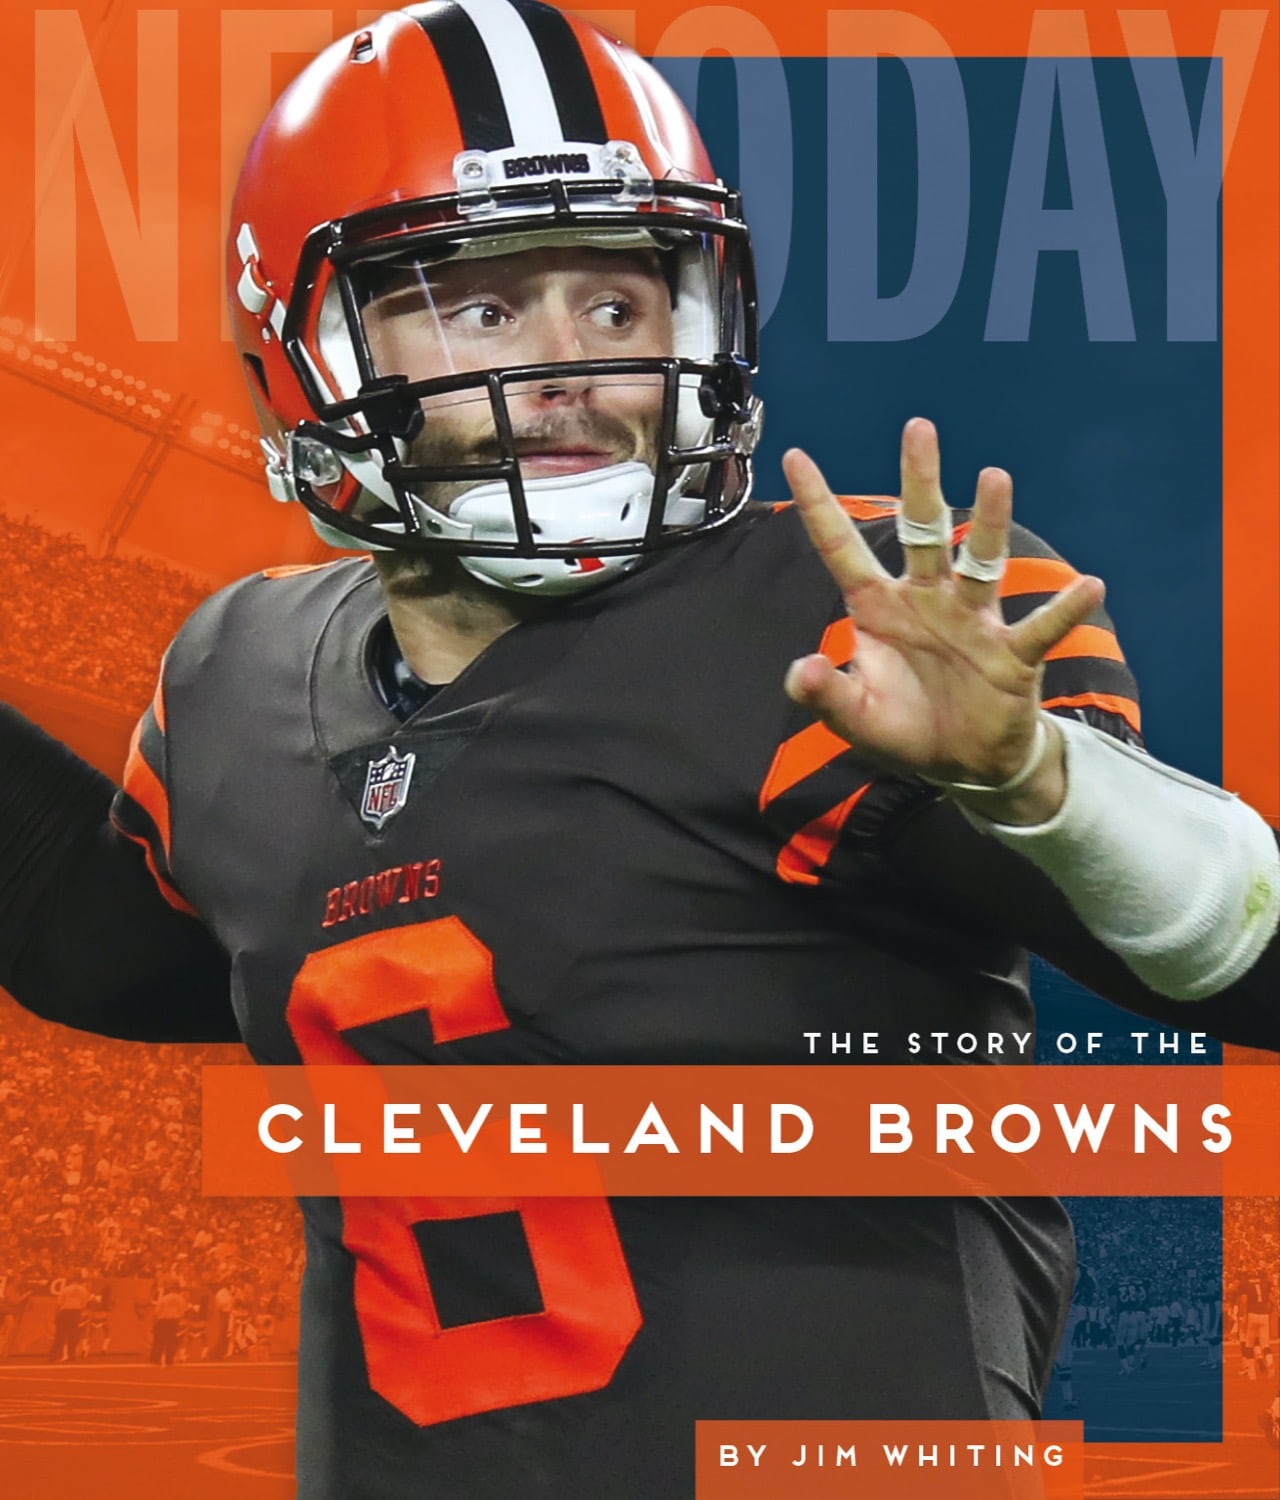 NFL Today: Cleveland Browns